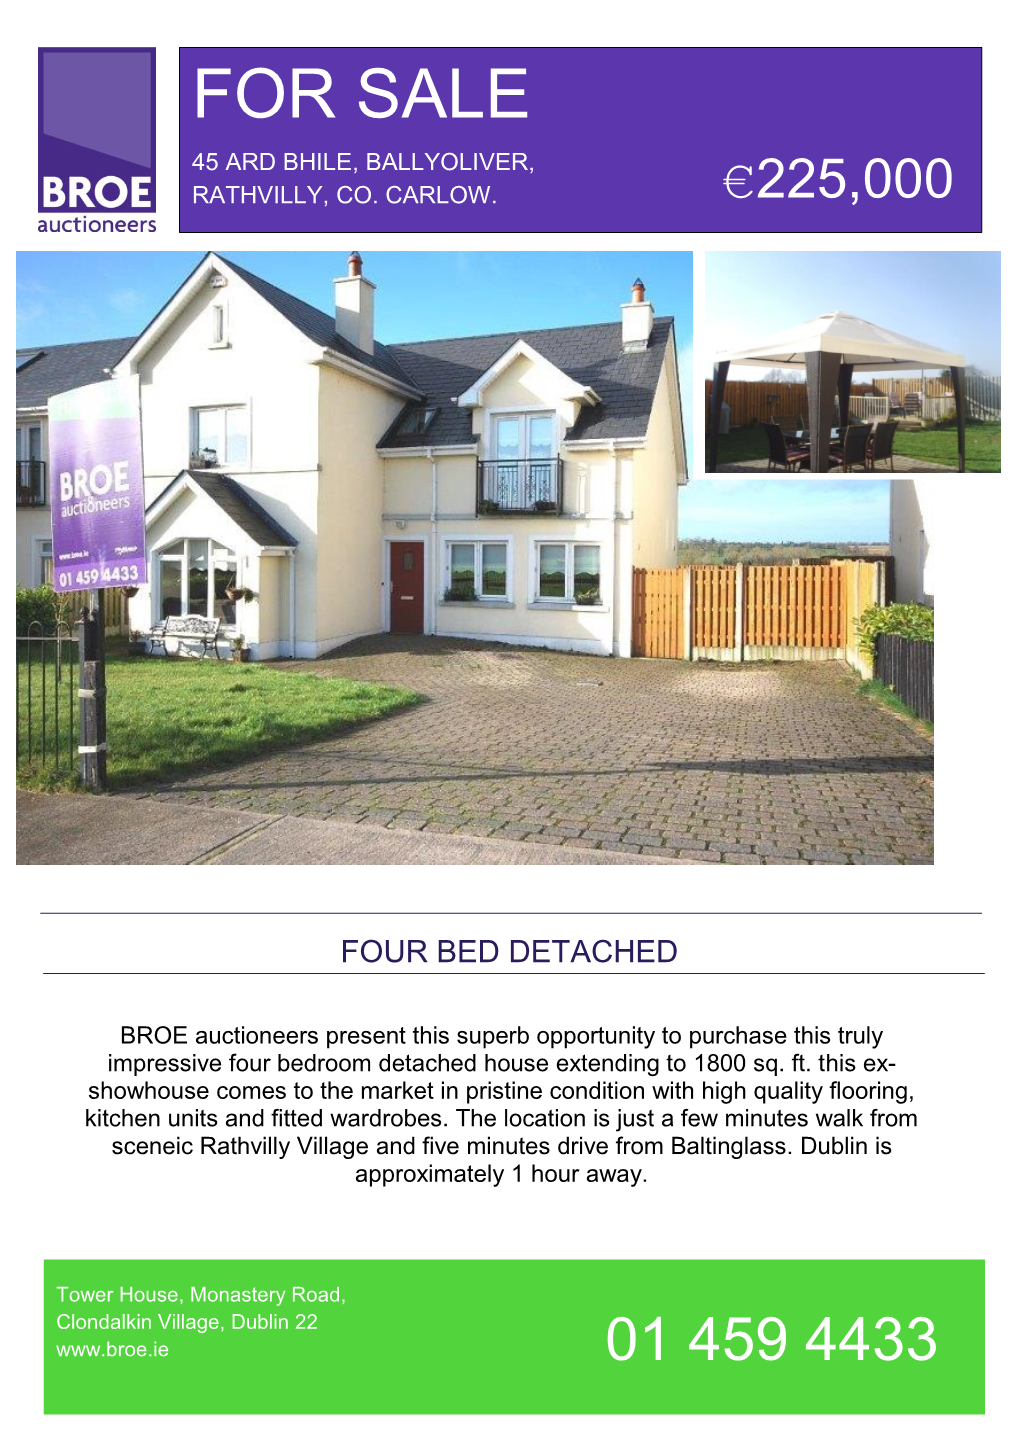 For Sale 45 Ard Bhile, Ballyoliver, Rathvilly, Co